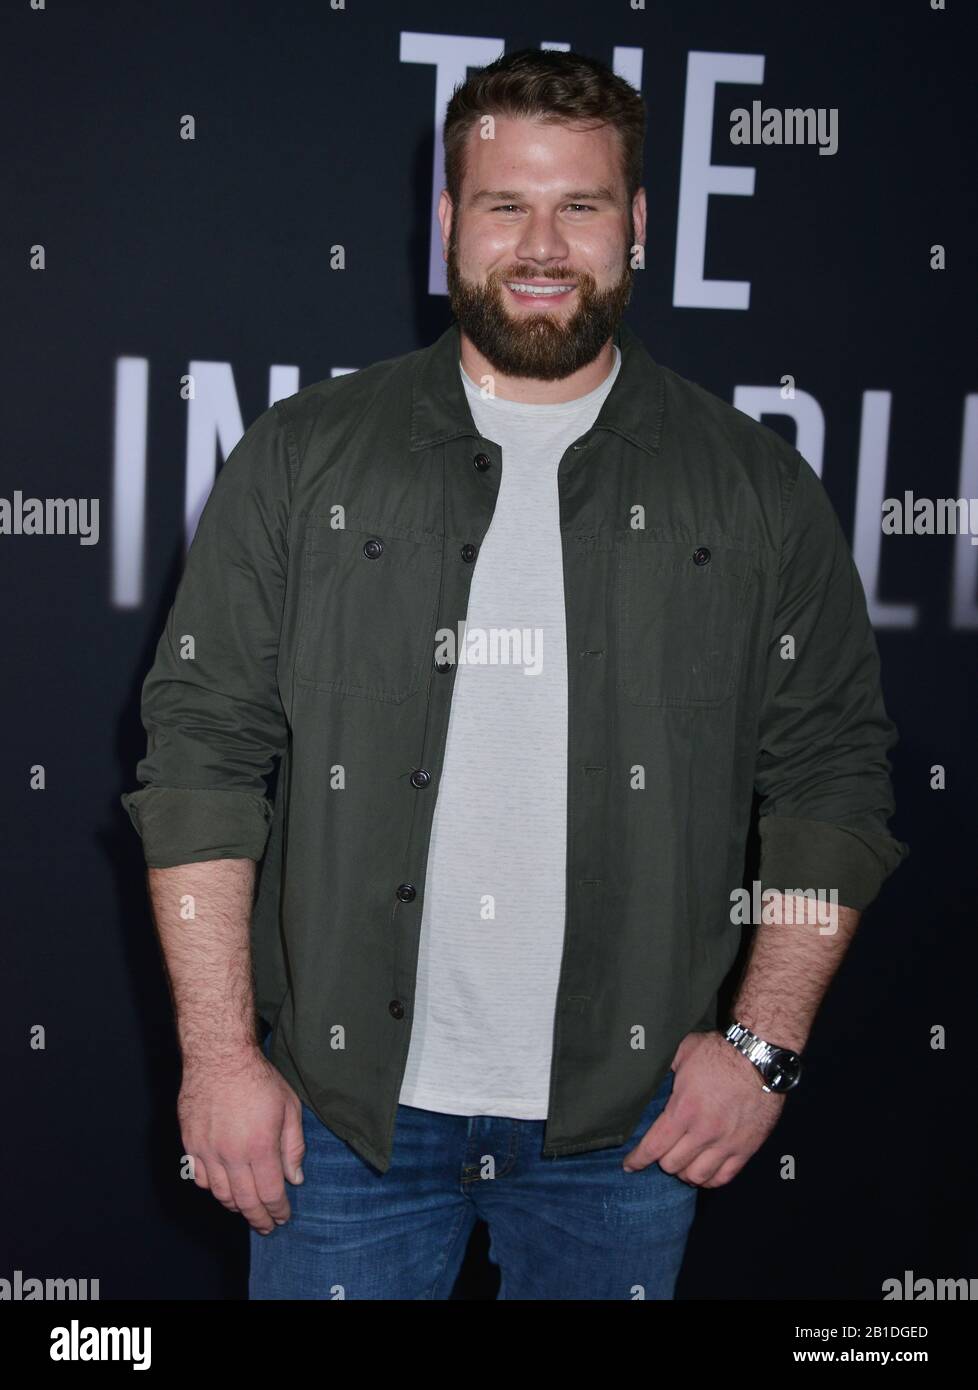 Los Angeles, USA. 25th Feb, 2020. Michael McCauley attends the Premiere of Universal Pictures' 'The Invisible Man' at TCL Chinese Theatre on February 24, 2020 in Hollywood, California Credit: Tsuni/USA/Alamy Live News Stock Photo